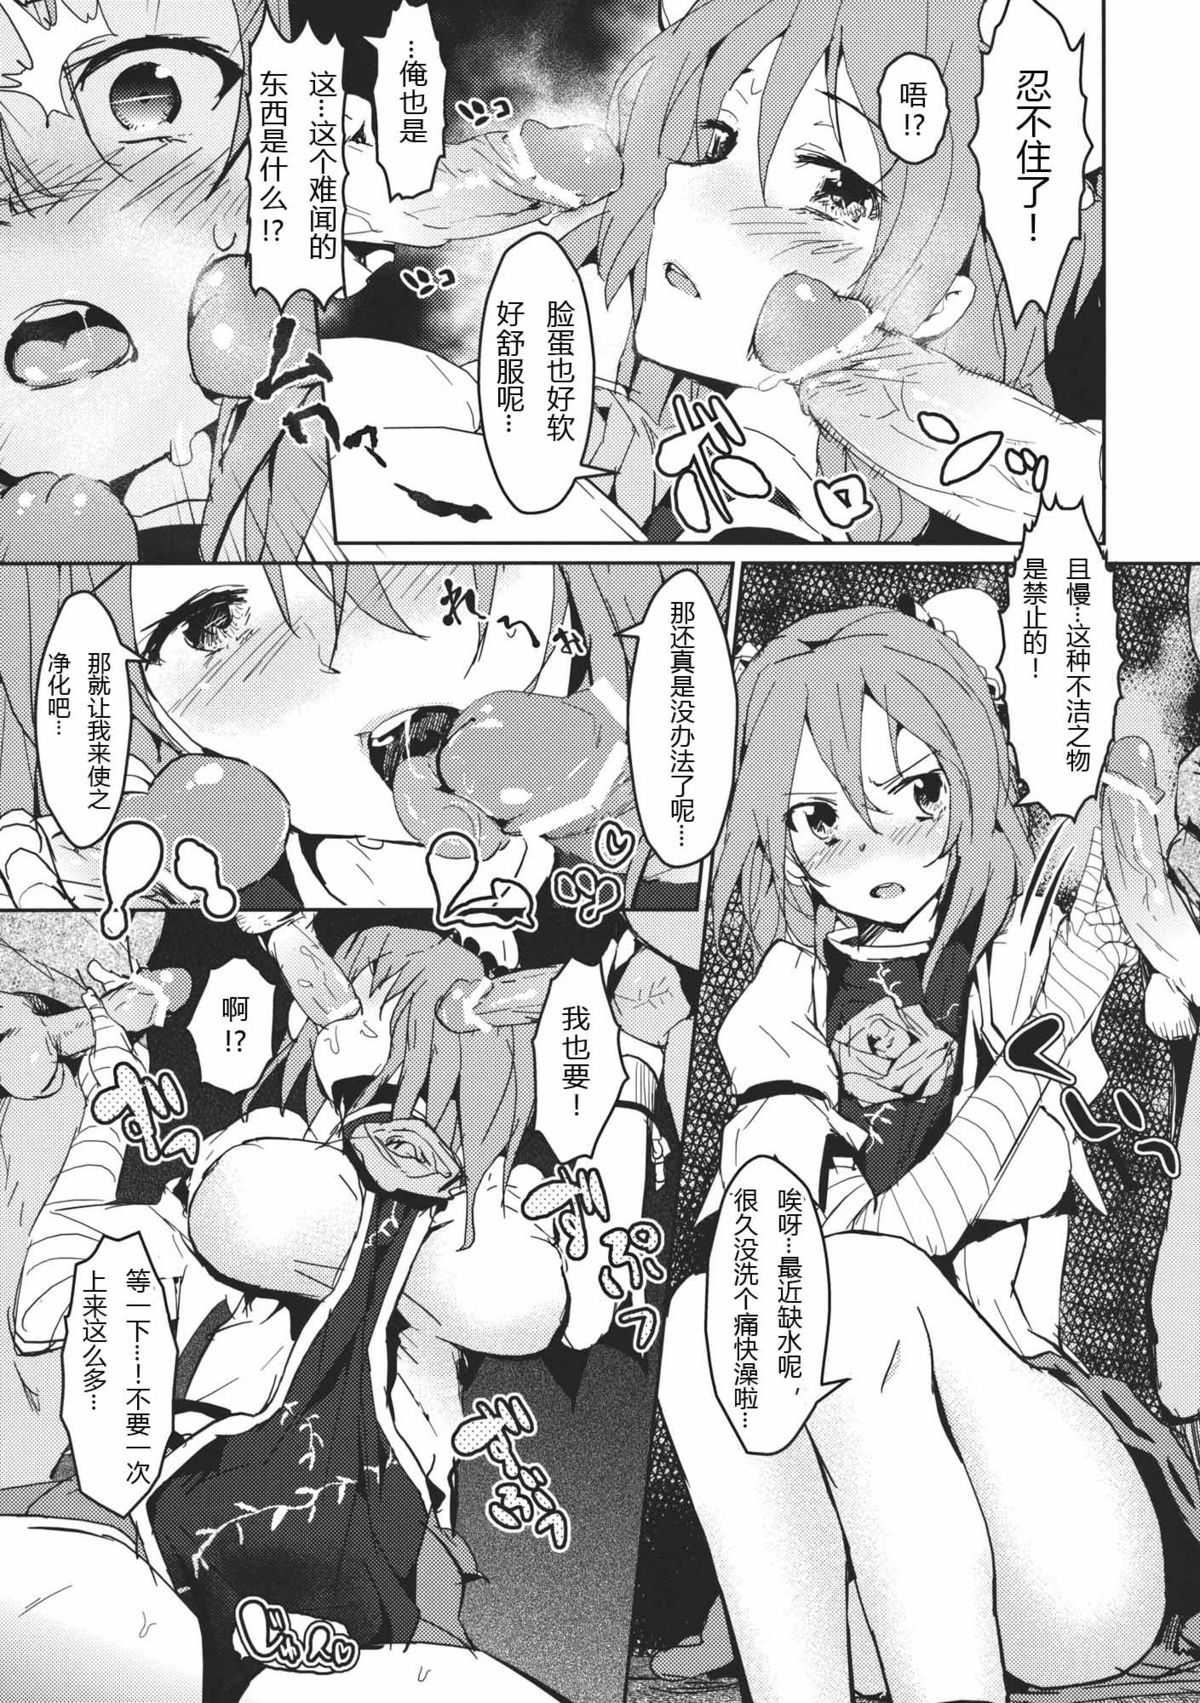 (C80) [Galley (ryoma)] Kasen-chan no Usui Hon (Touhou Project) (chinese) [汉化](C80)(同人誌)[Galley] 華扇ちゃんの薄い本 (東方) (エロ)